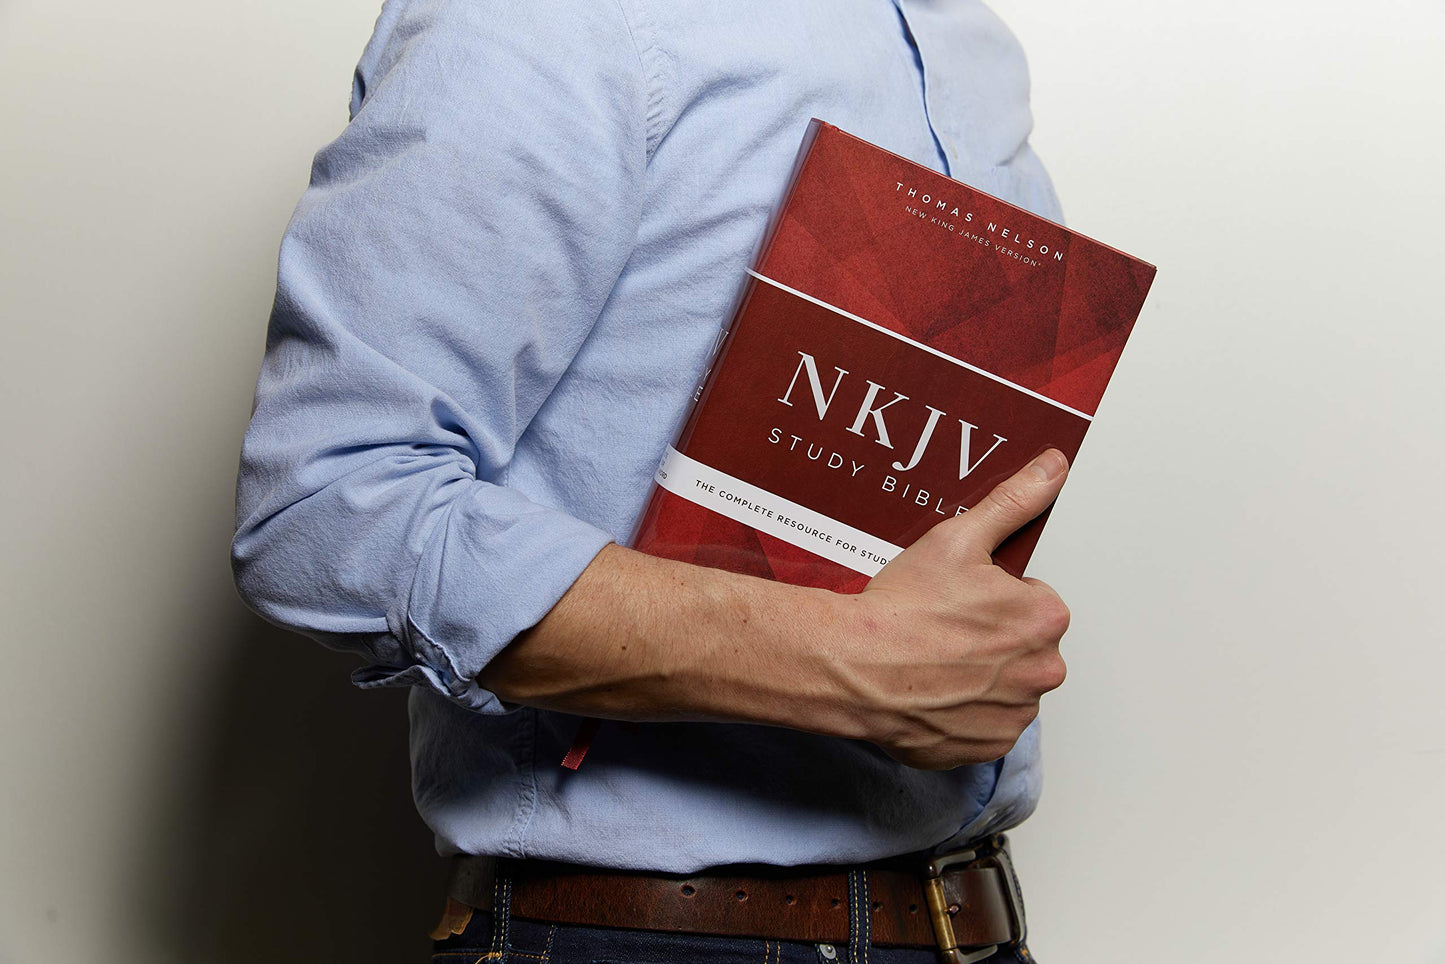 NKJV Study Bible, Comfort Print: The Complete Resource for Studying God’s Word